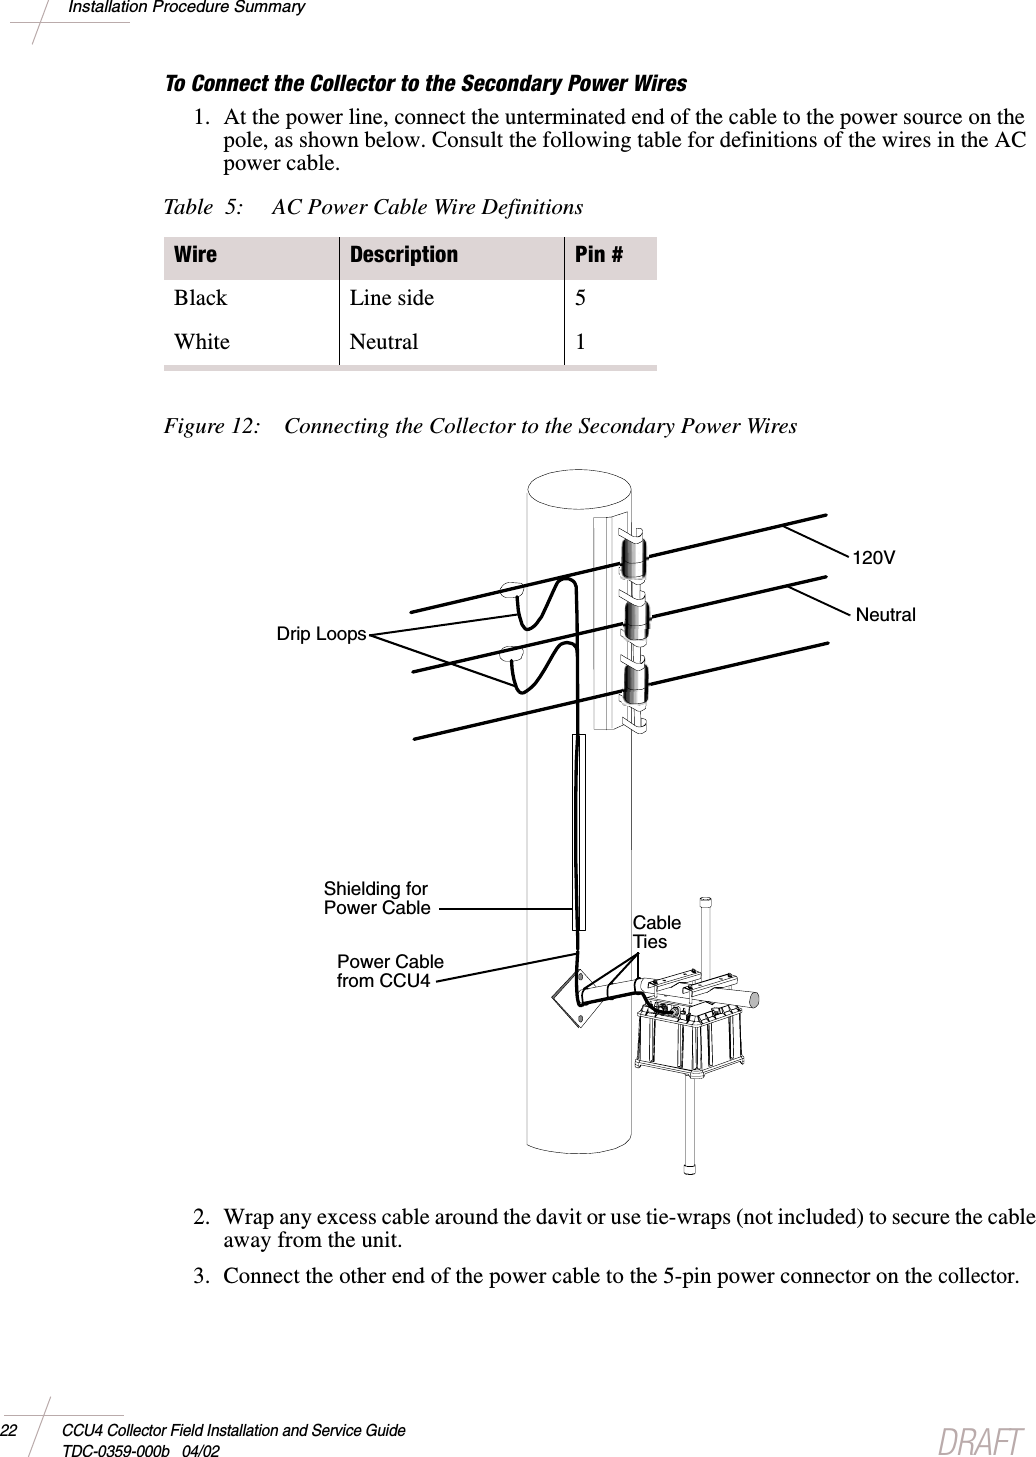 DRAFT22 CCU4 Collector Field Installation and Service GuideTDC-0359-000b 04/02Installation Procedure SummaryTo Connect the Collector to the Secondary Power Wires1. At the power line, connect the unterminated end of the cable to the power source on thepole, as shown below. Consult the following table for definitions of the wires in the ACpower cable.Figure 12: Connecting the Collector to the Secondary Power Wires2. Wrap any excess cable around the davit or use tie-wraps (not included) to secure the cableaway from the unit.3. Connect the other end of the power cable to the 5-pin power connector on thecollector.Table 5: AC Power Cable Wire DefinitionsWire Description Pin #Black Line side 5White Neutral 1Power Cablefrom CCU4Shielding forPower CableDrip Loops120VNeutralCableTies